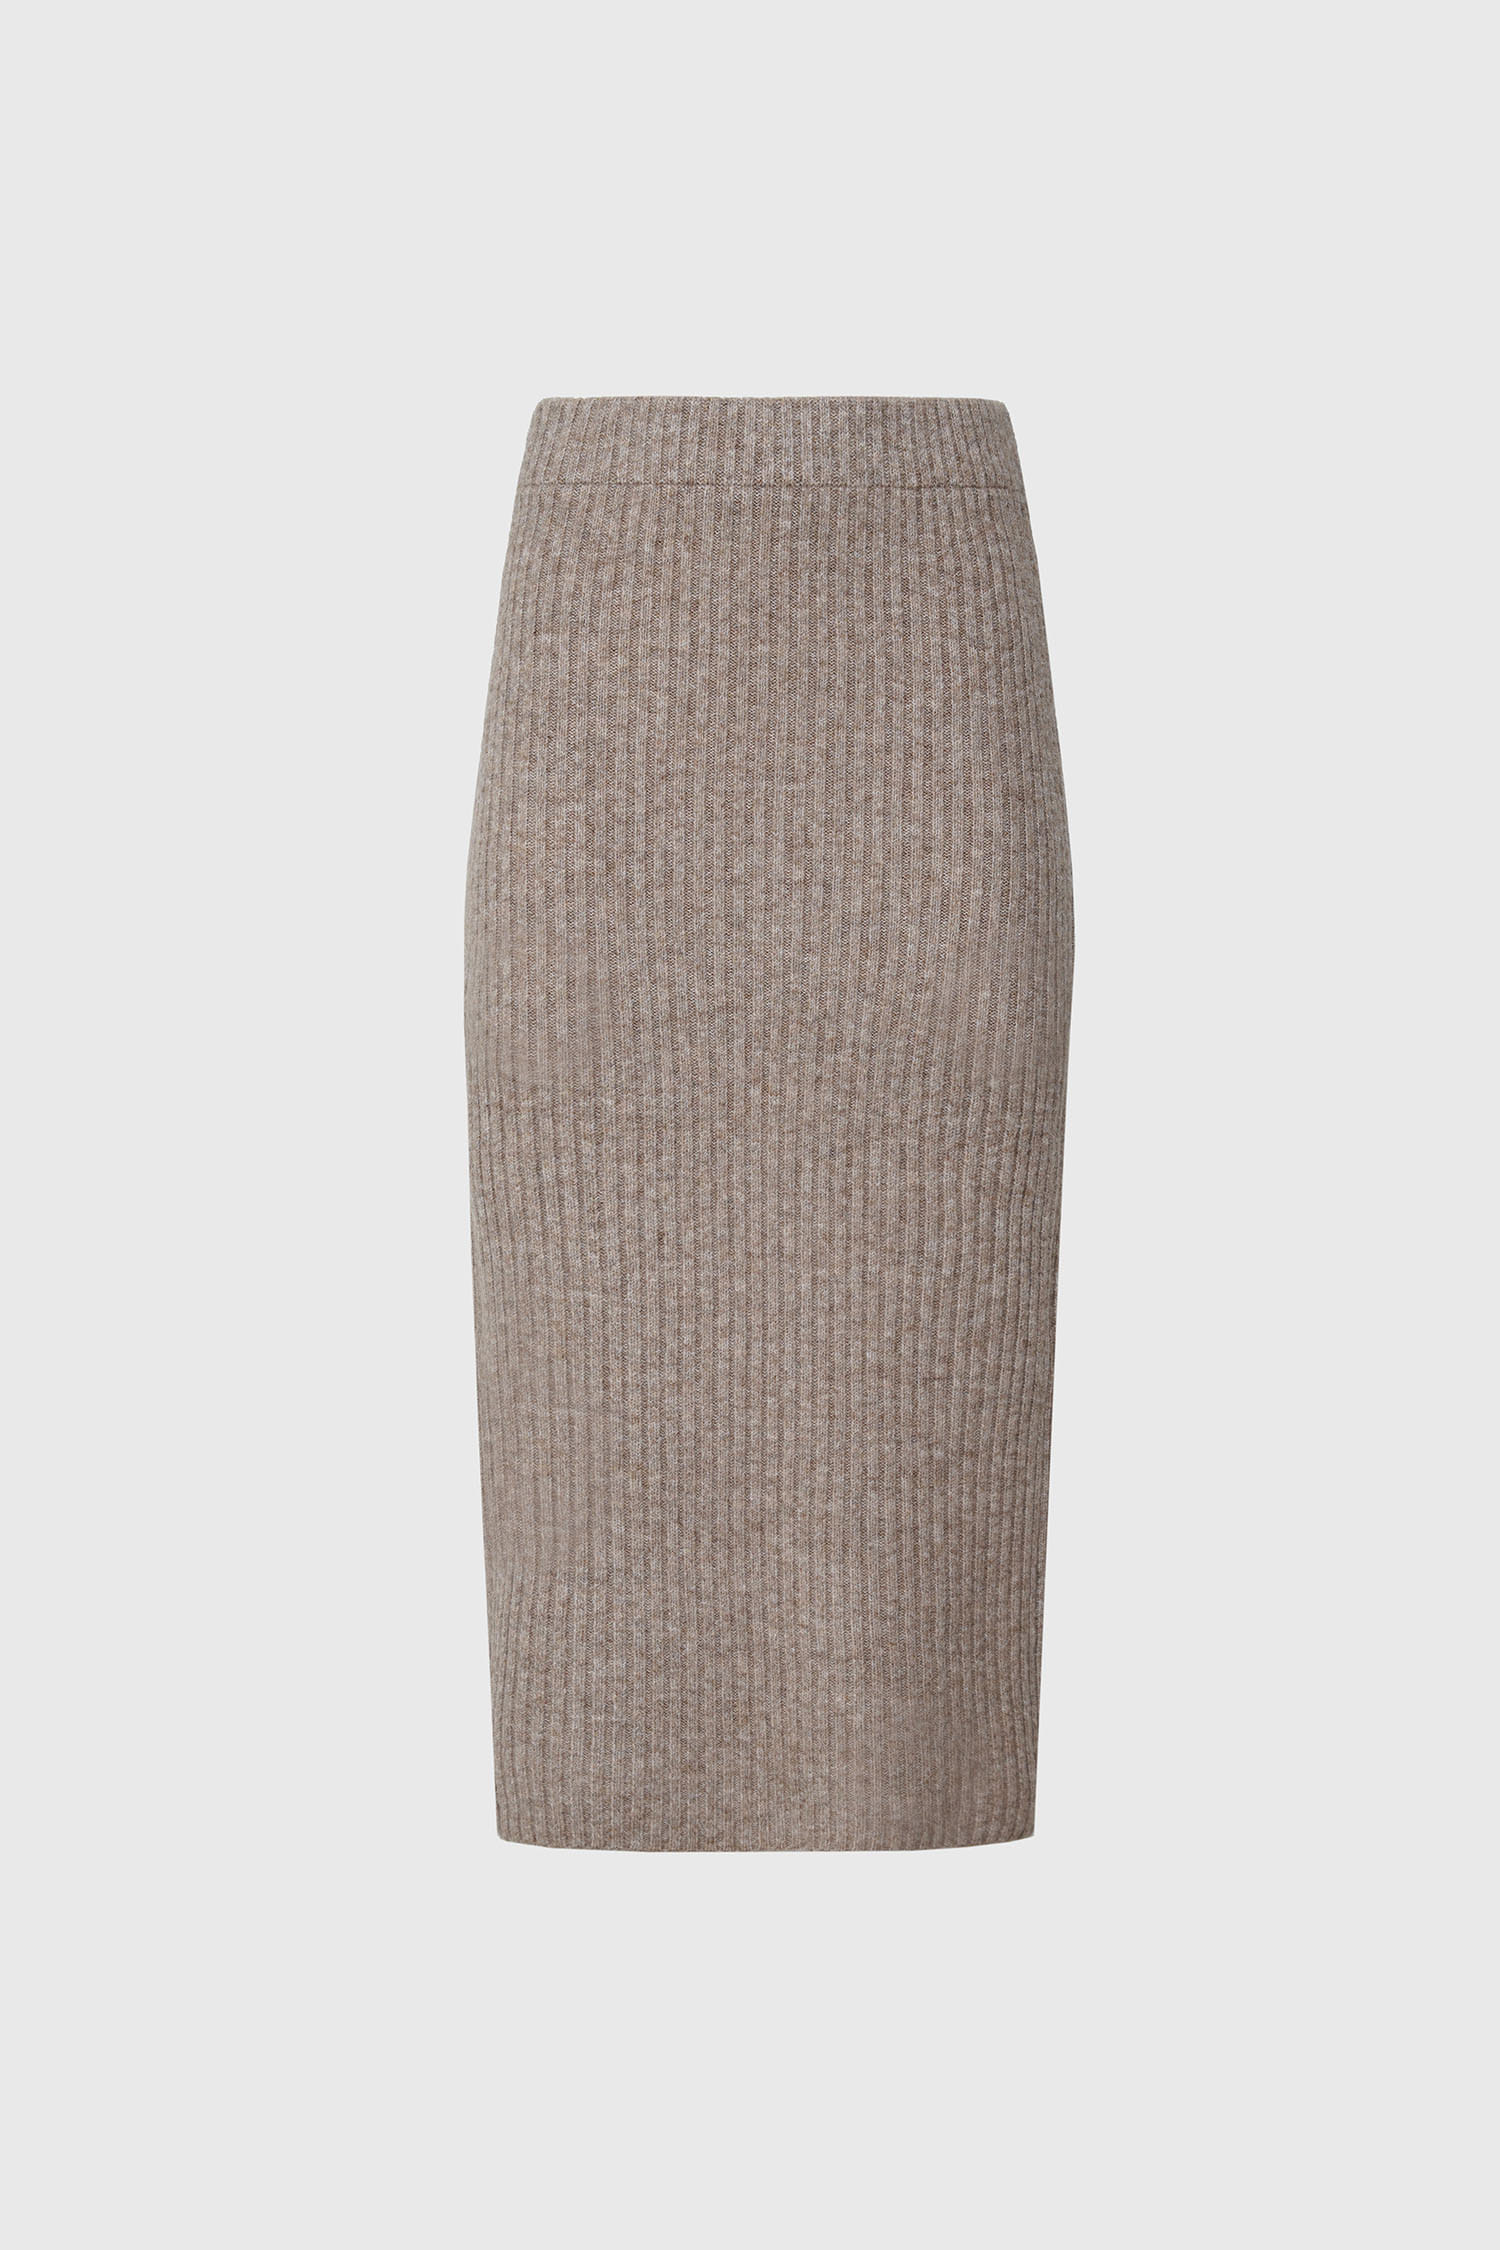 Warmth wrinkle knit skirt - oatmeal